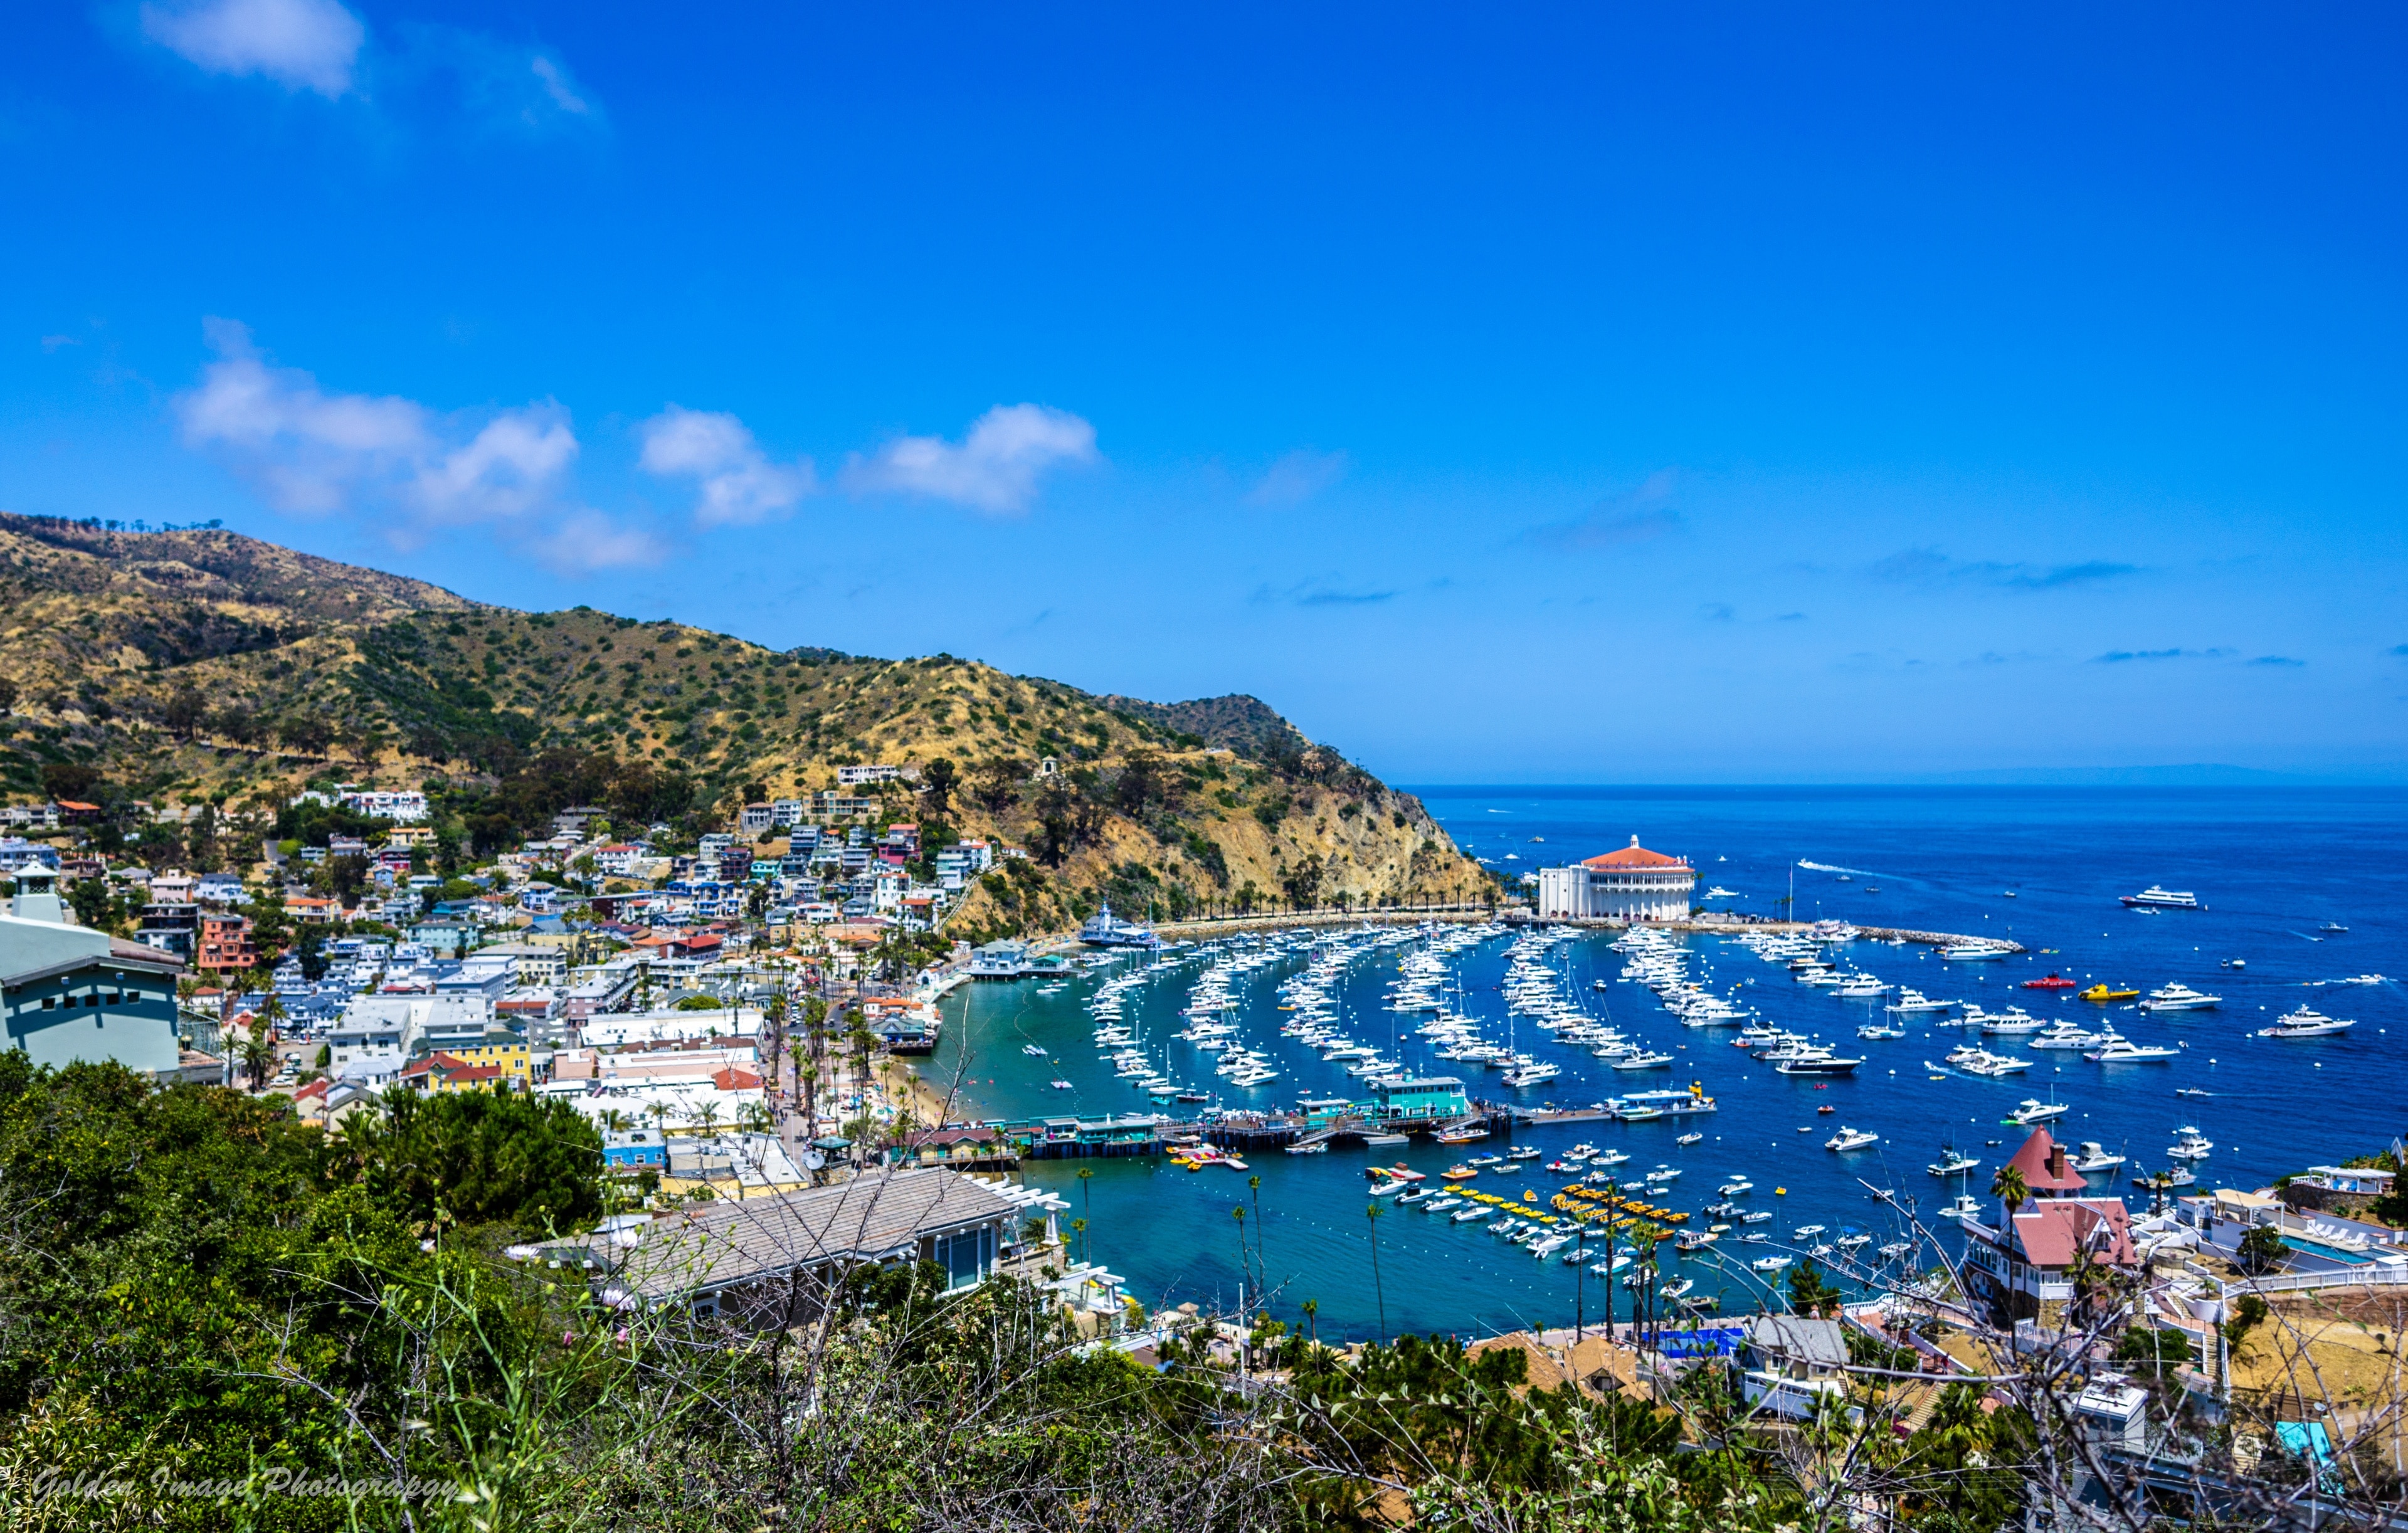 30 Places to Travel Without a Passport - Outdoor Excitement and Island Leisure in Catalina